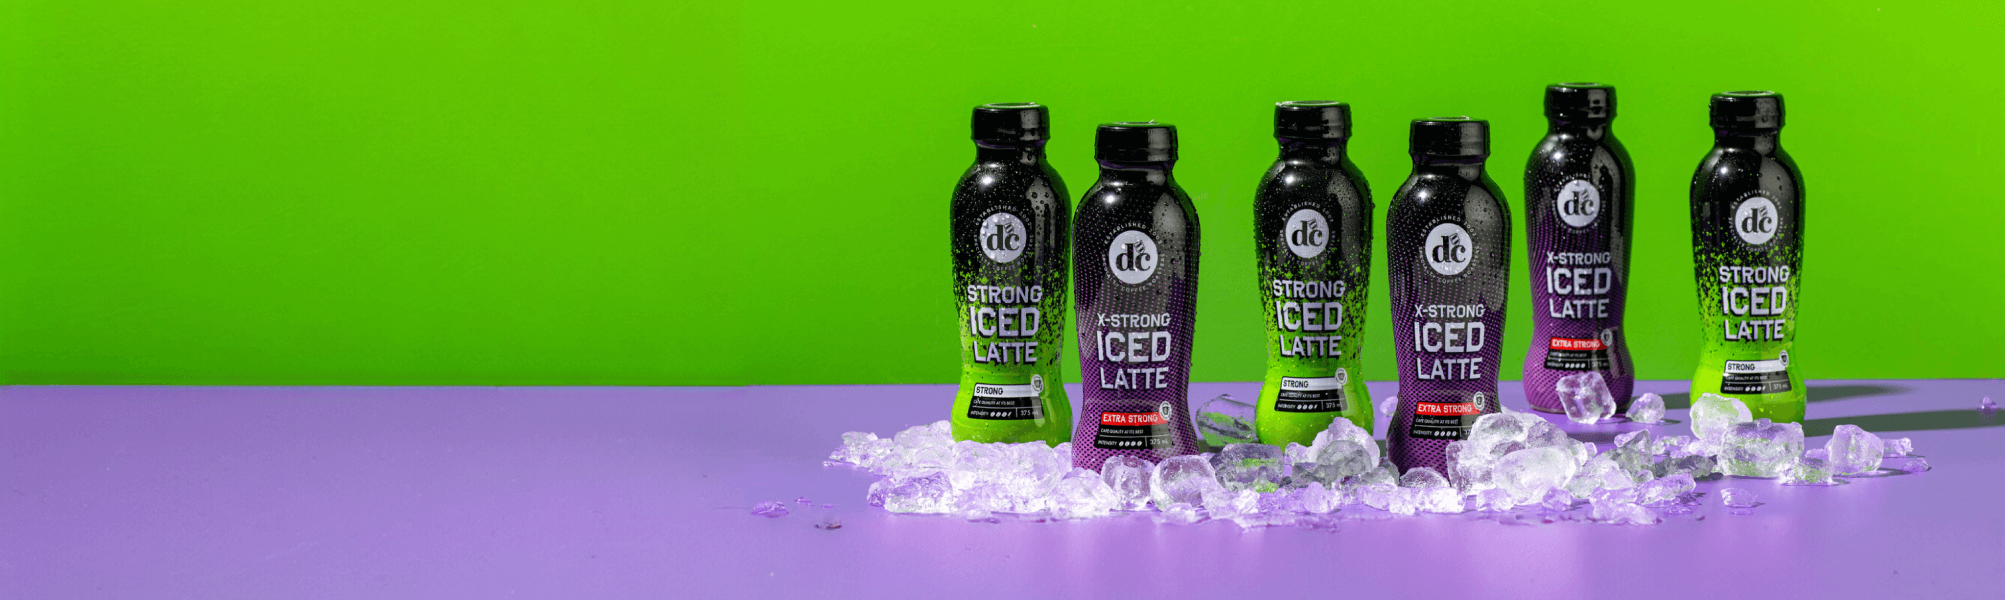 iced coffee bottles with ice